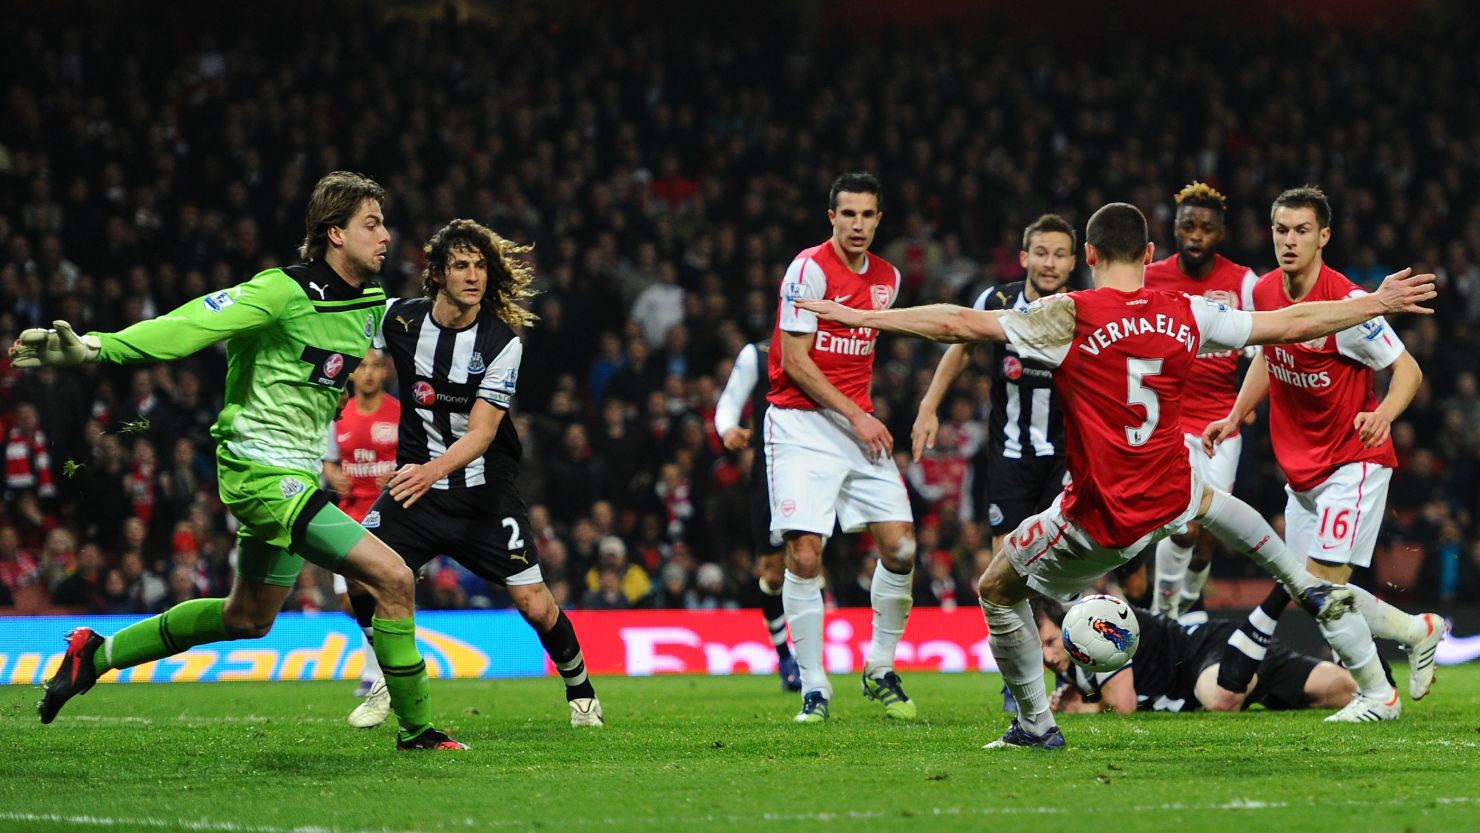 Thomas Vermaelen was in the right place at the right time to score a crucial late winner for Arsenal against Newcastle.